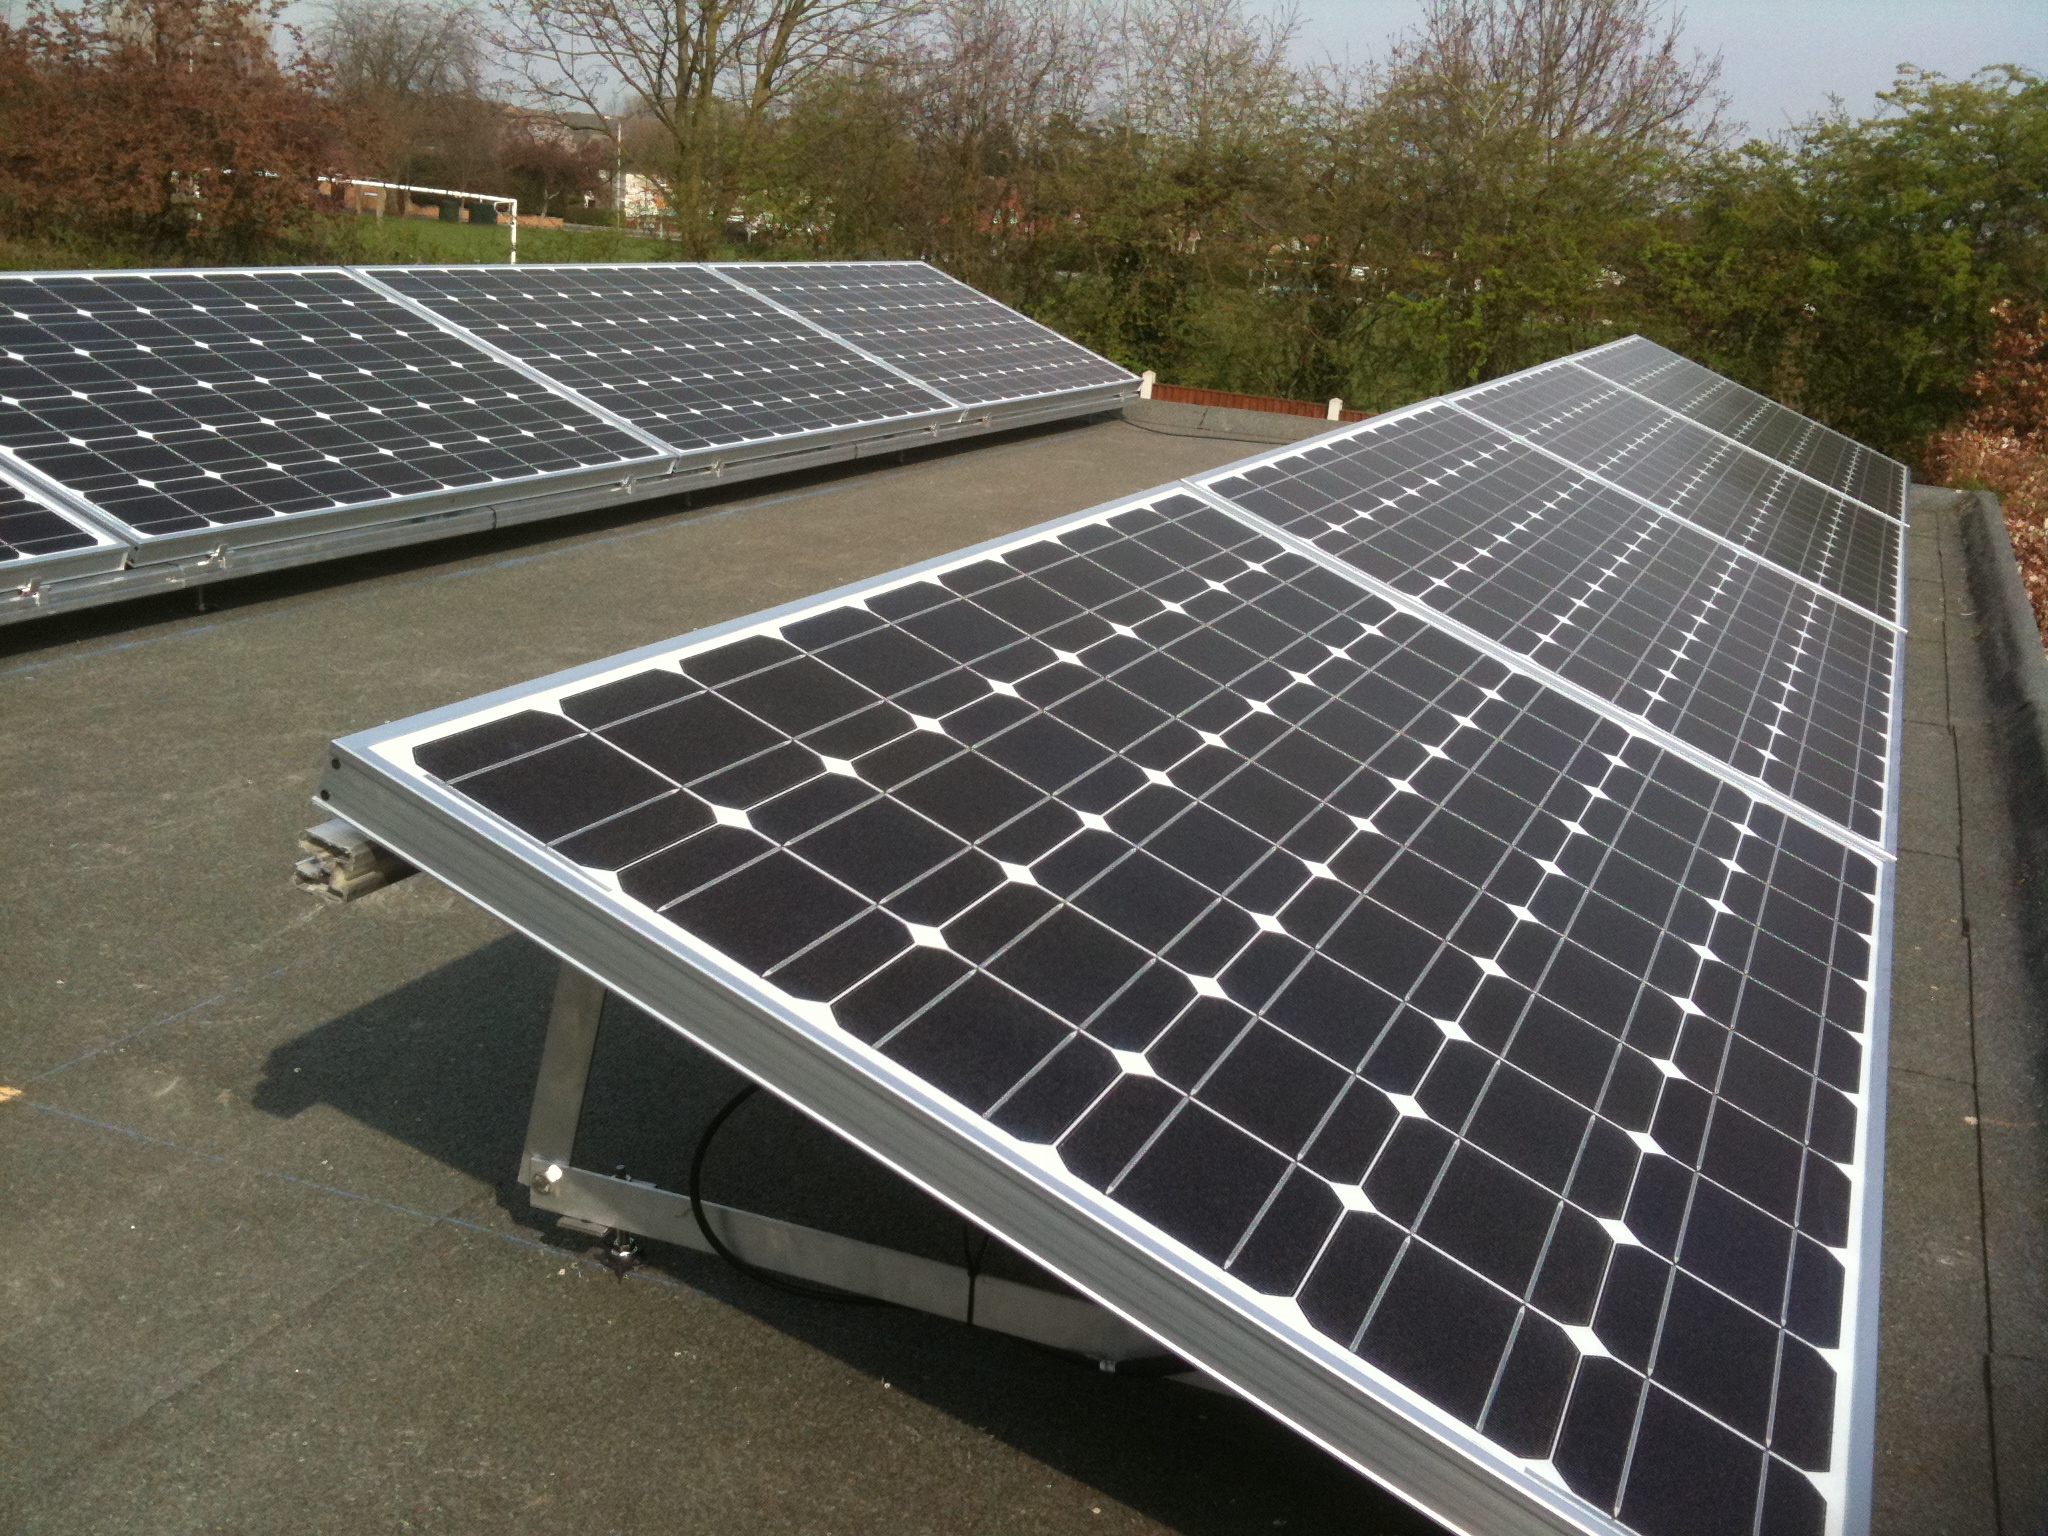 Solar panels fitted onto flat roofs using " Ballast Trays" 